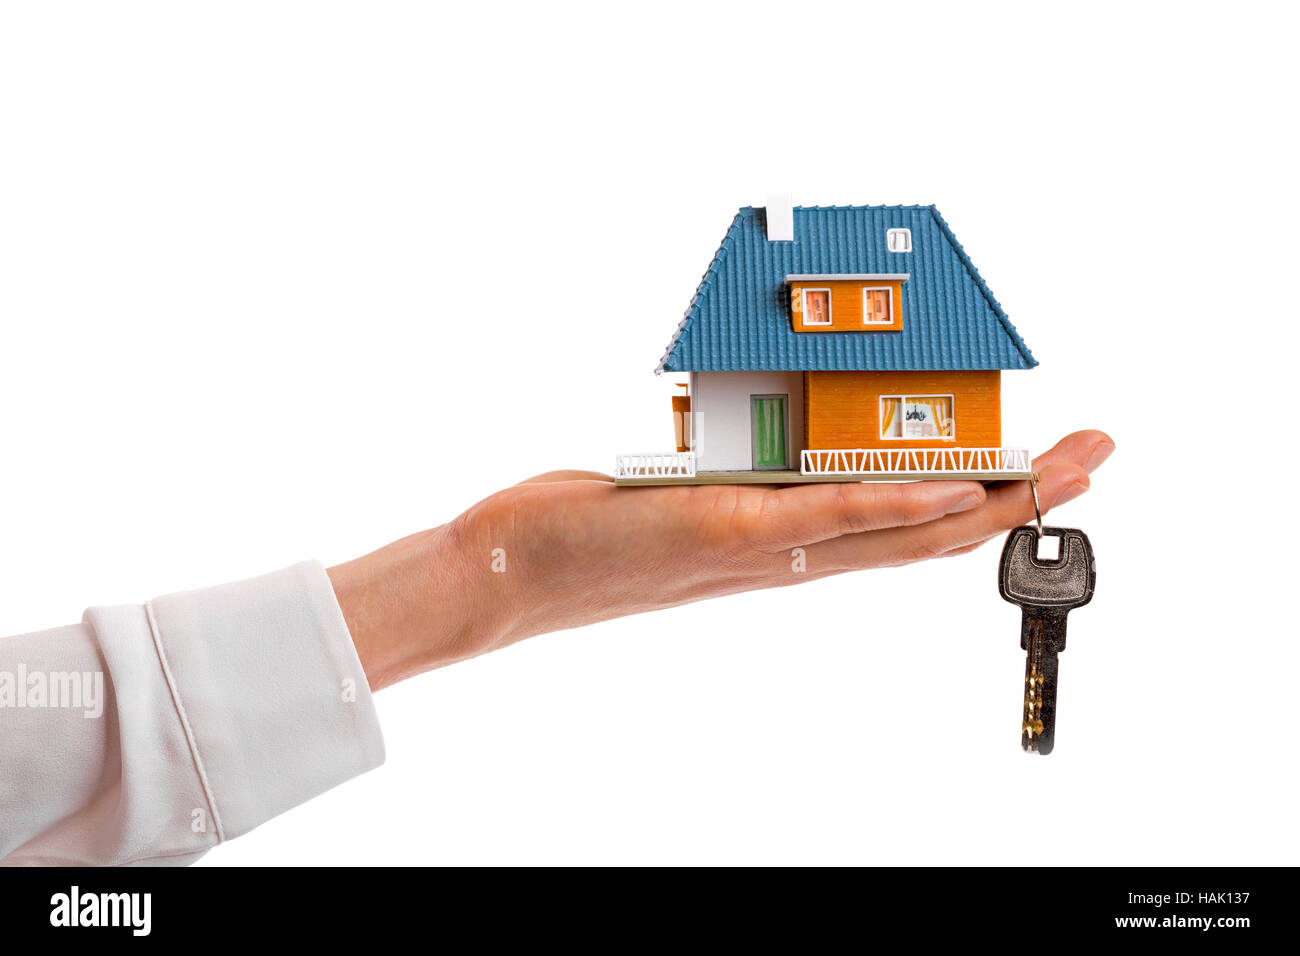 buying new real estate concept, small family house and key on woman's hand Stock Photo